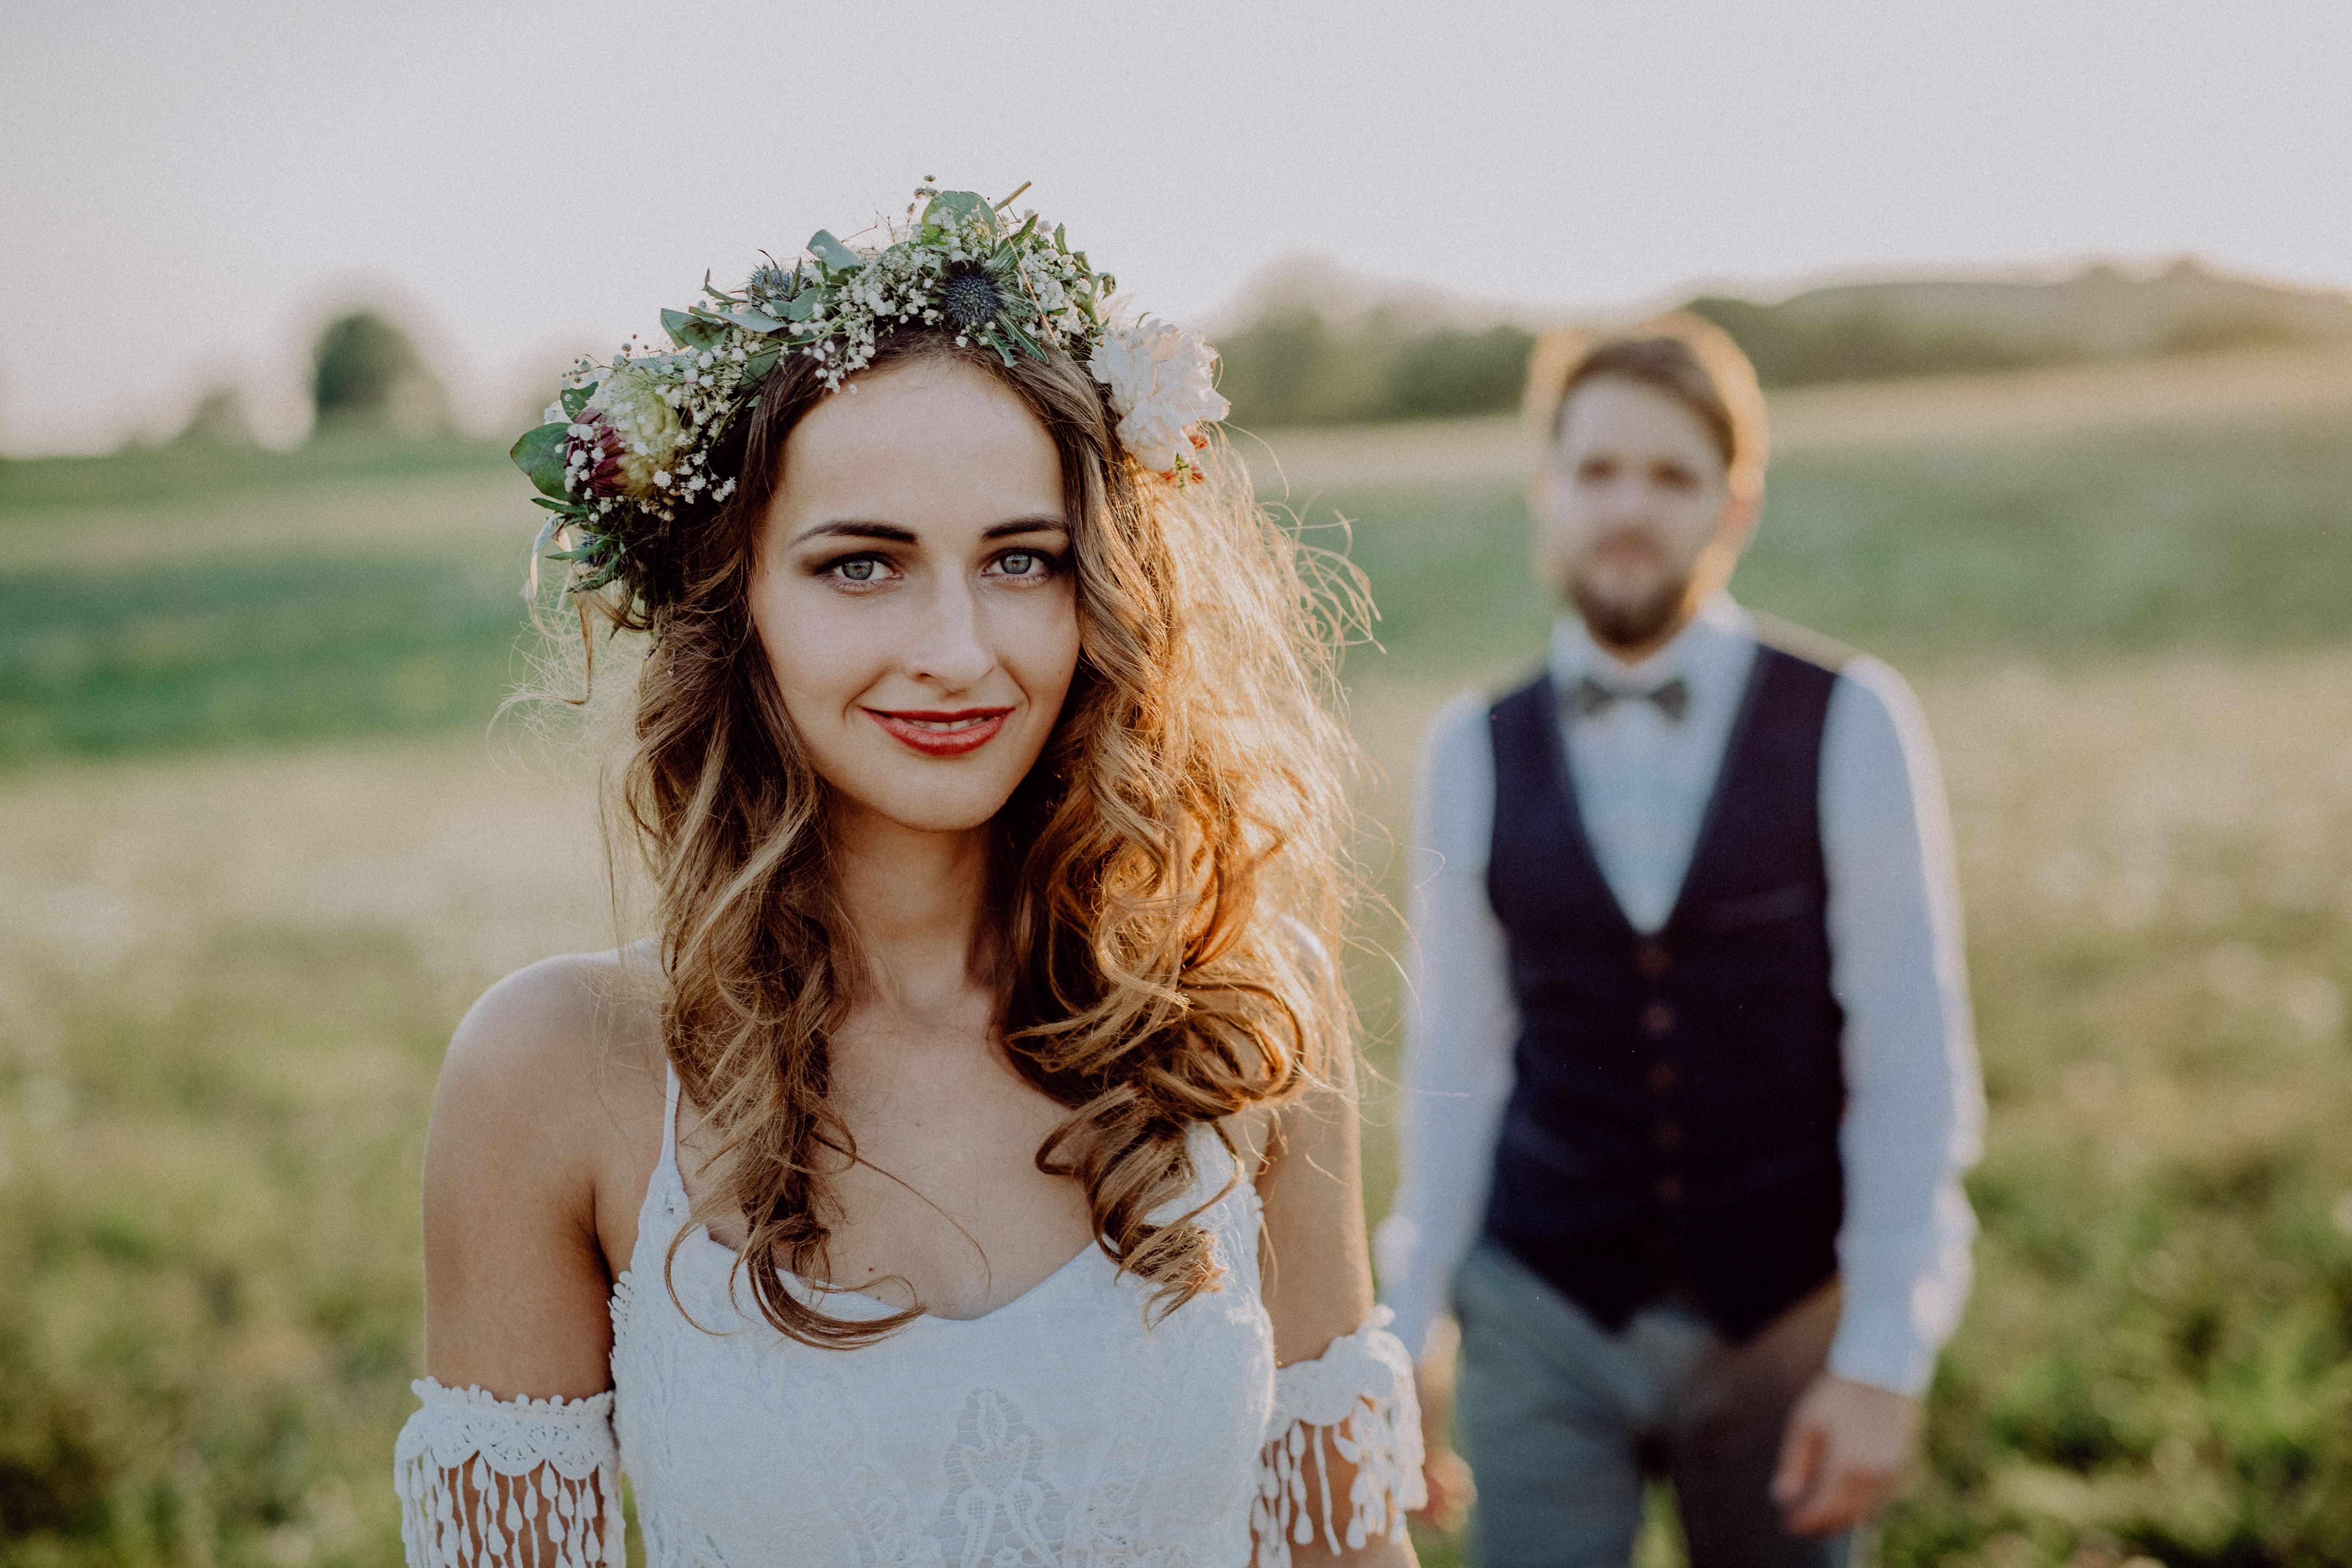 beautiful-bride-and-groom-at-sunset-in-green-natur-PG3HH65.jpg